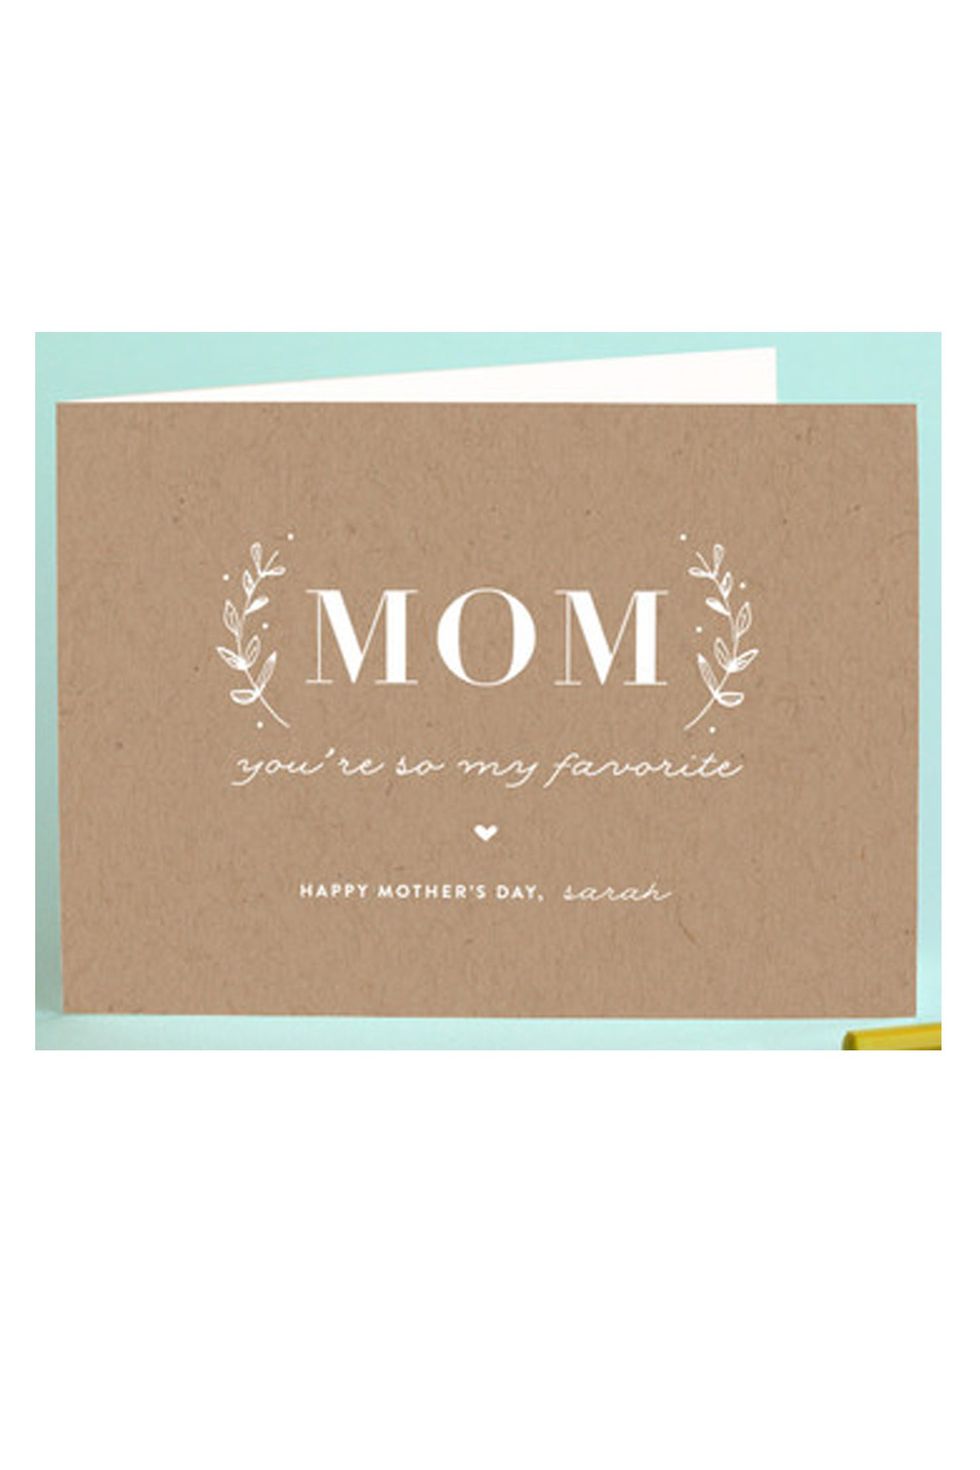 My Favorite Mother's Day Greeting Cards